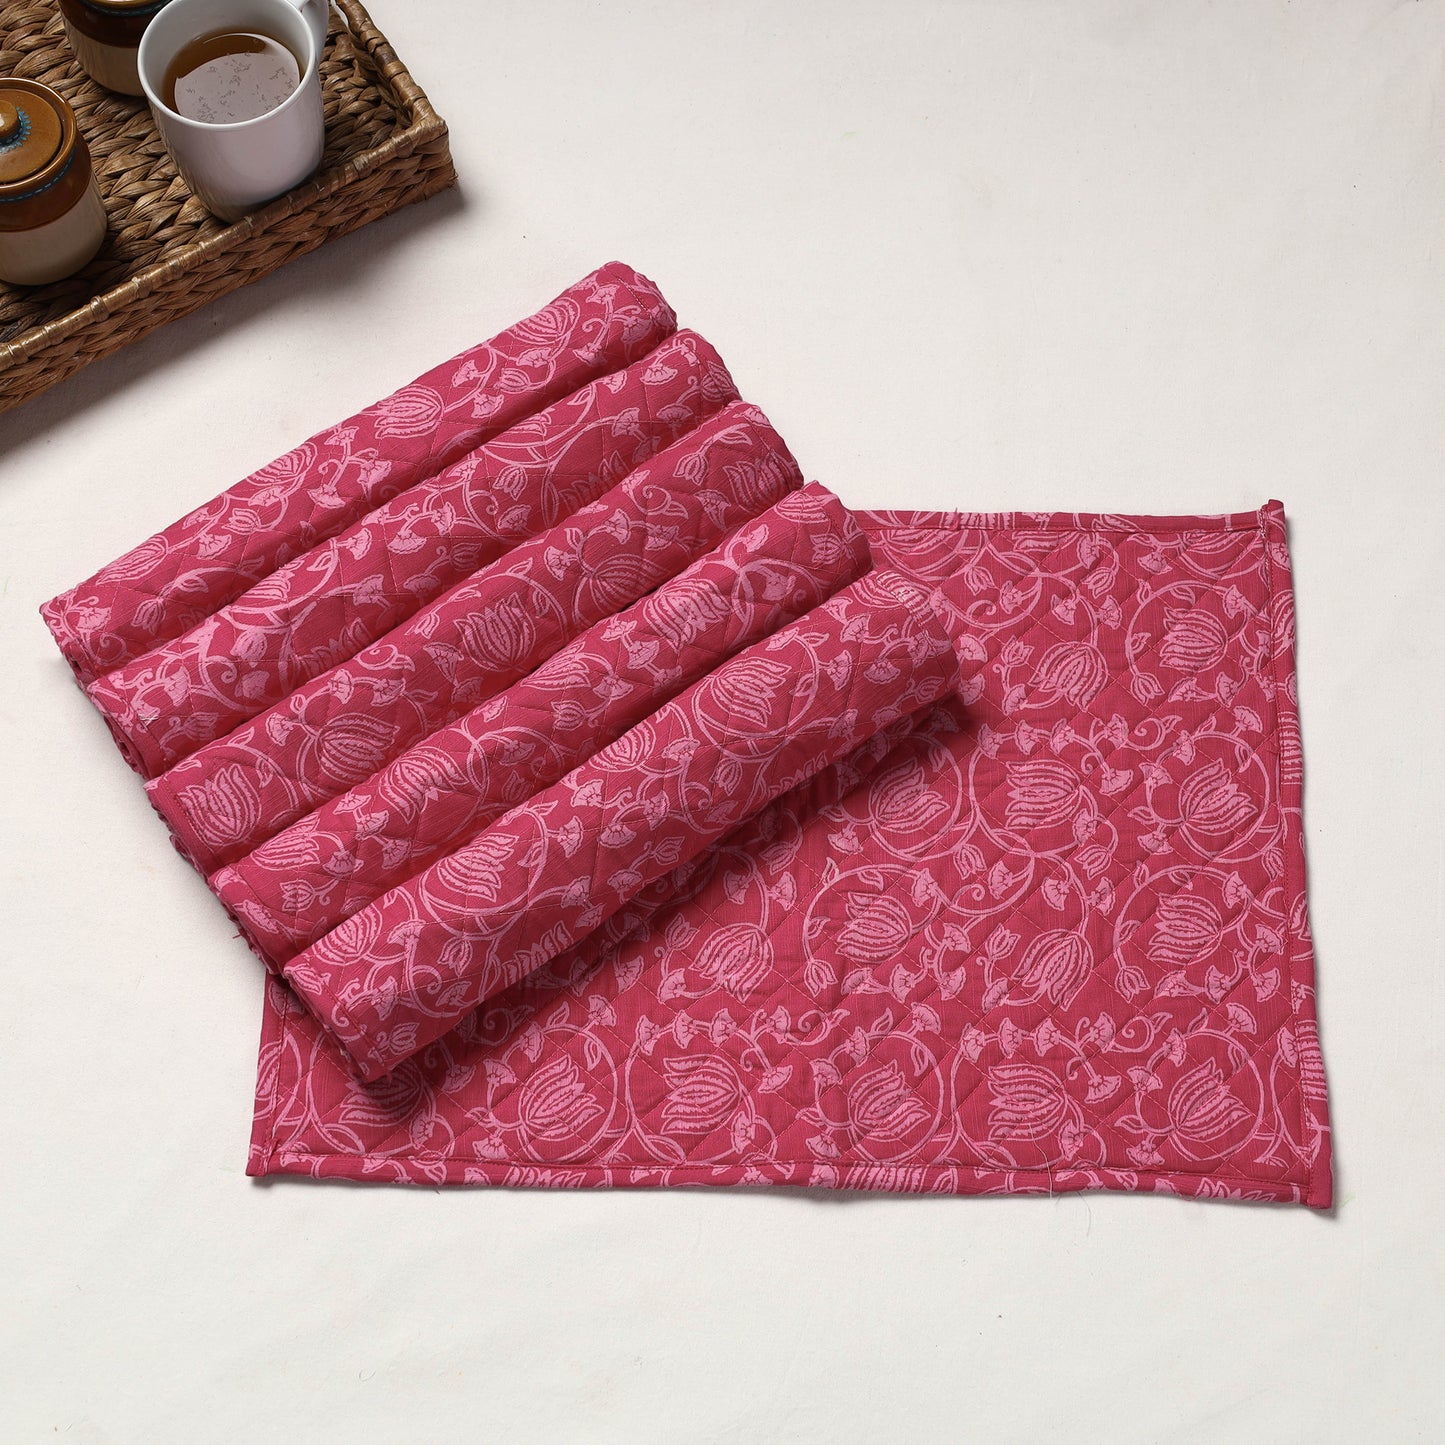 Set of 6 Handmade Cotton Fabric Quilted Table Mats by Chandi Mati (19 x 13 in)